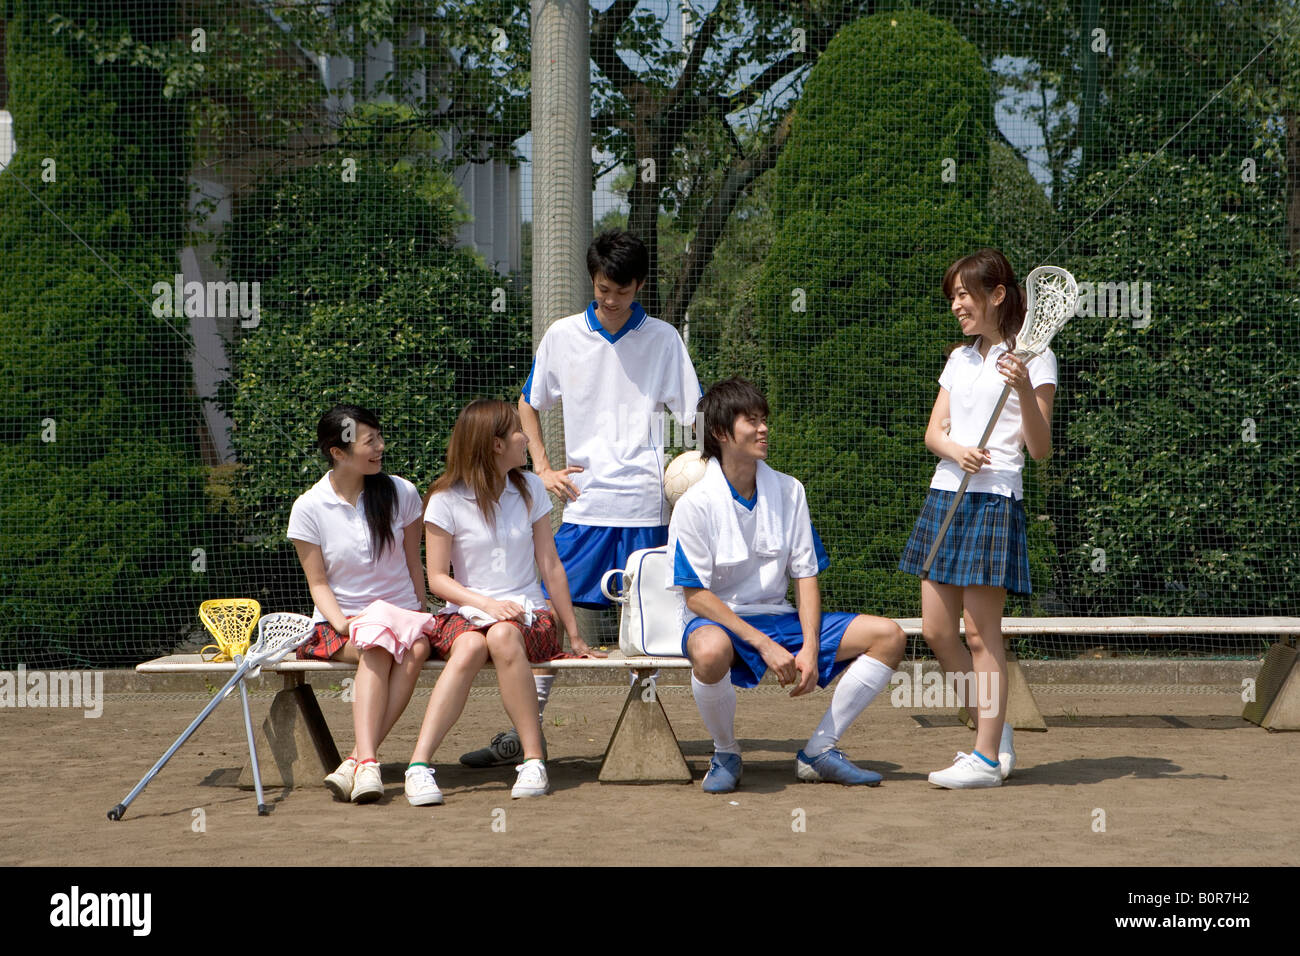 Three girls and two boys sitting on bench during physical education classes Stock Photo